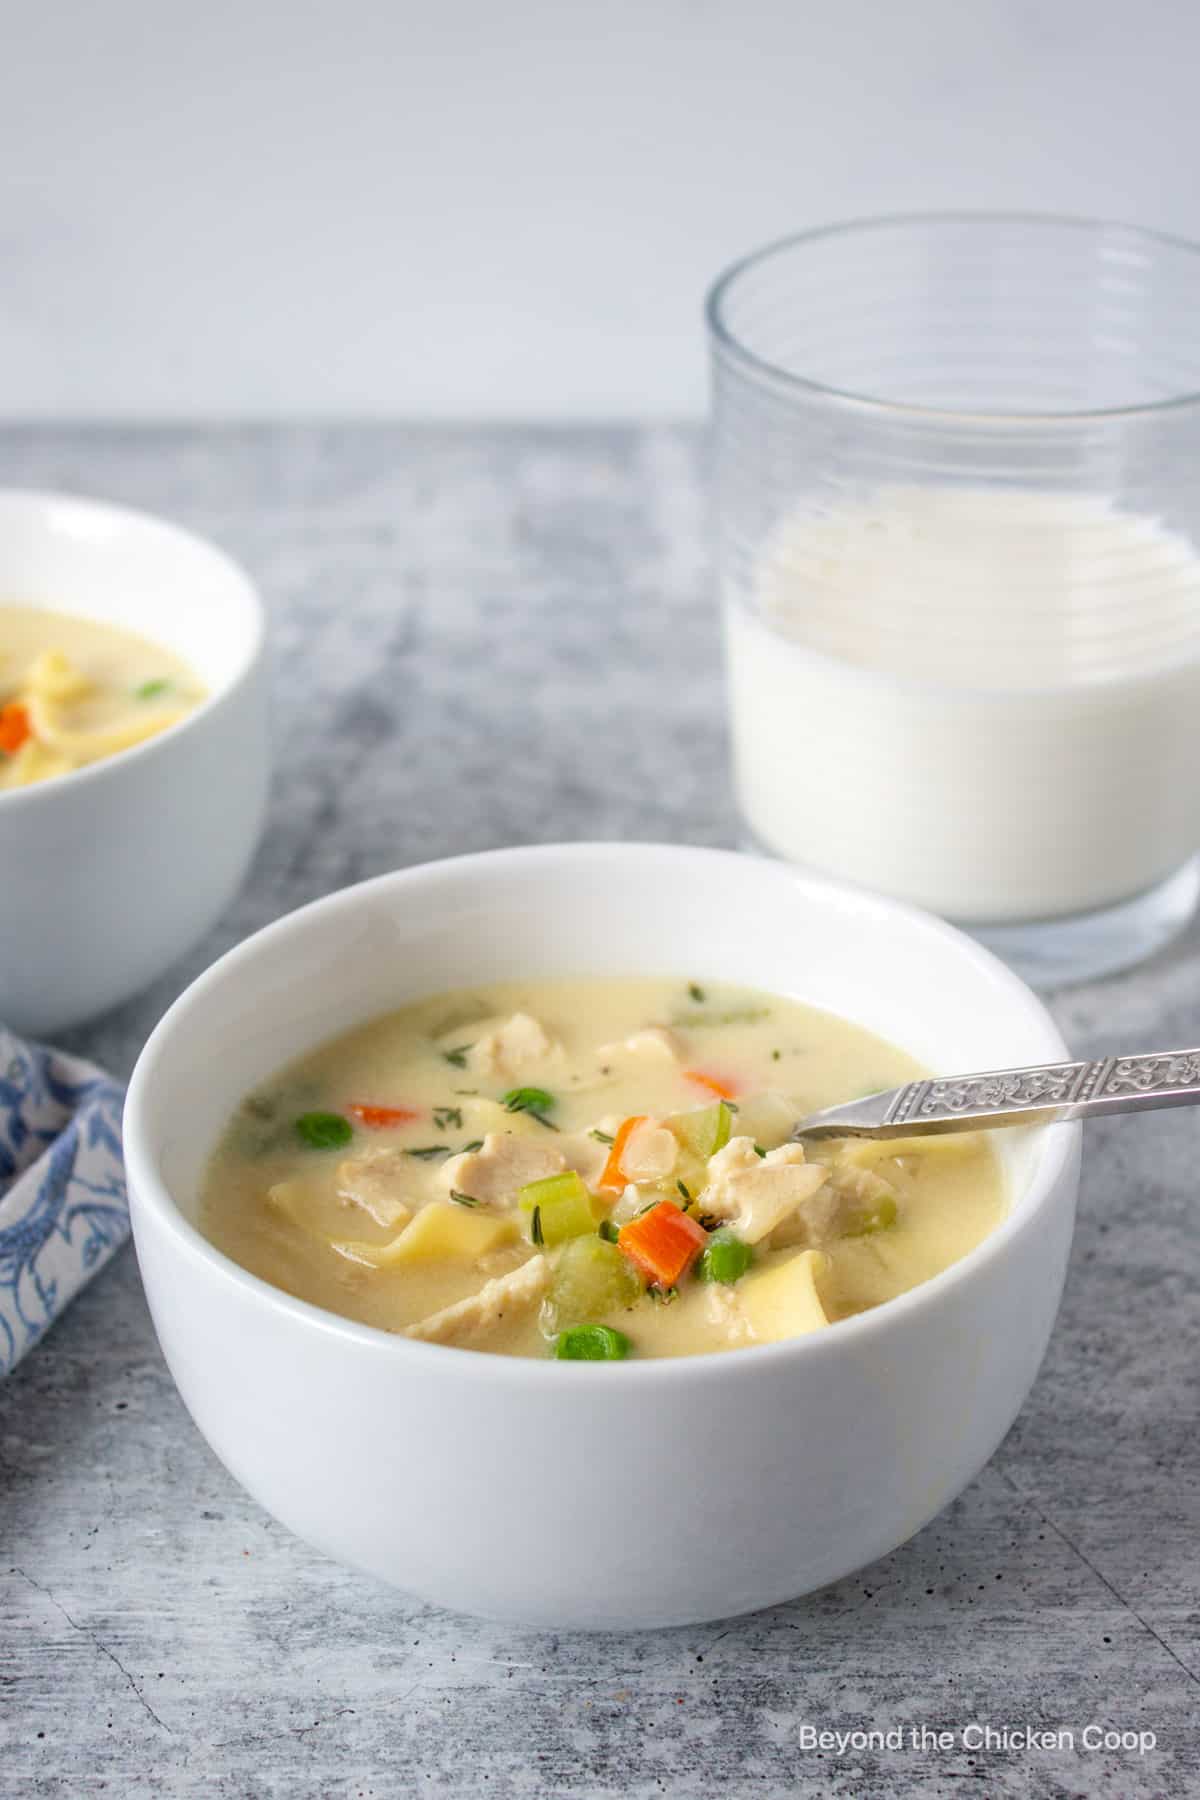 Creamy chicken soup with noodles.